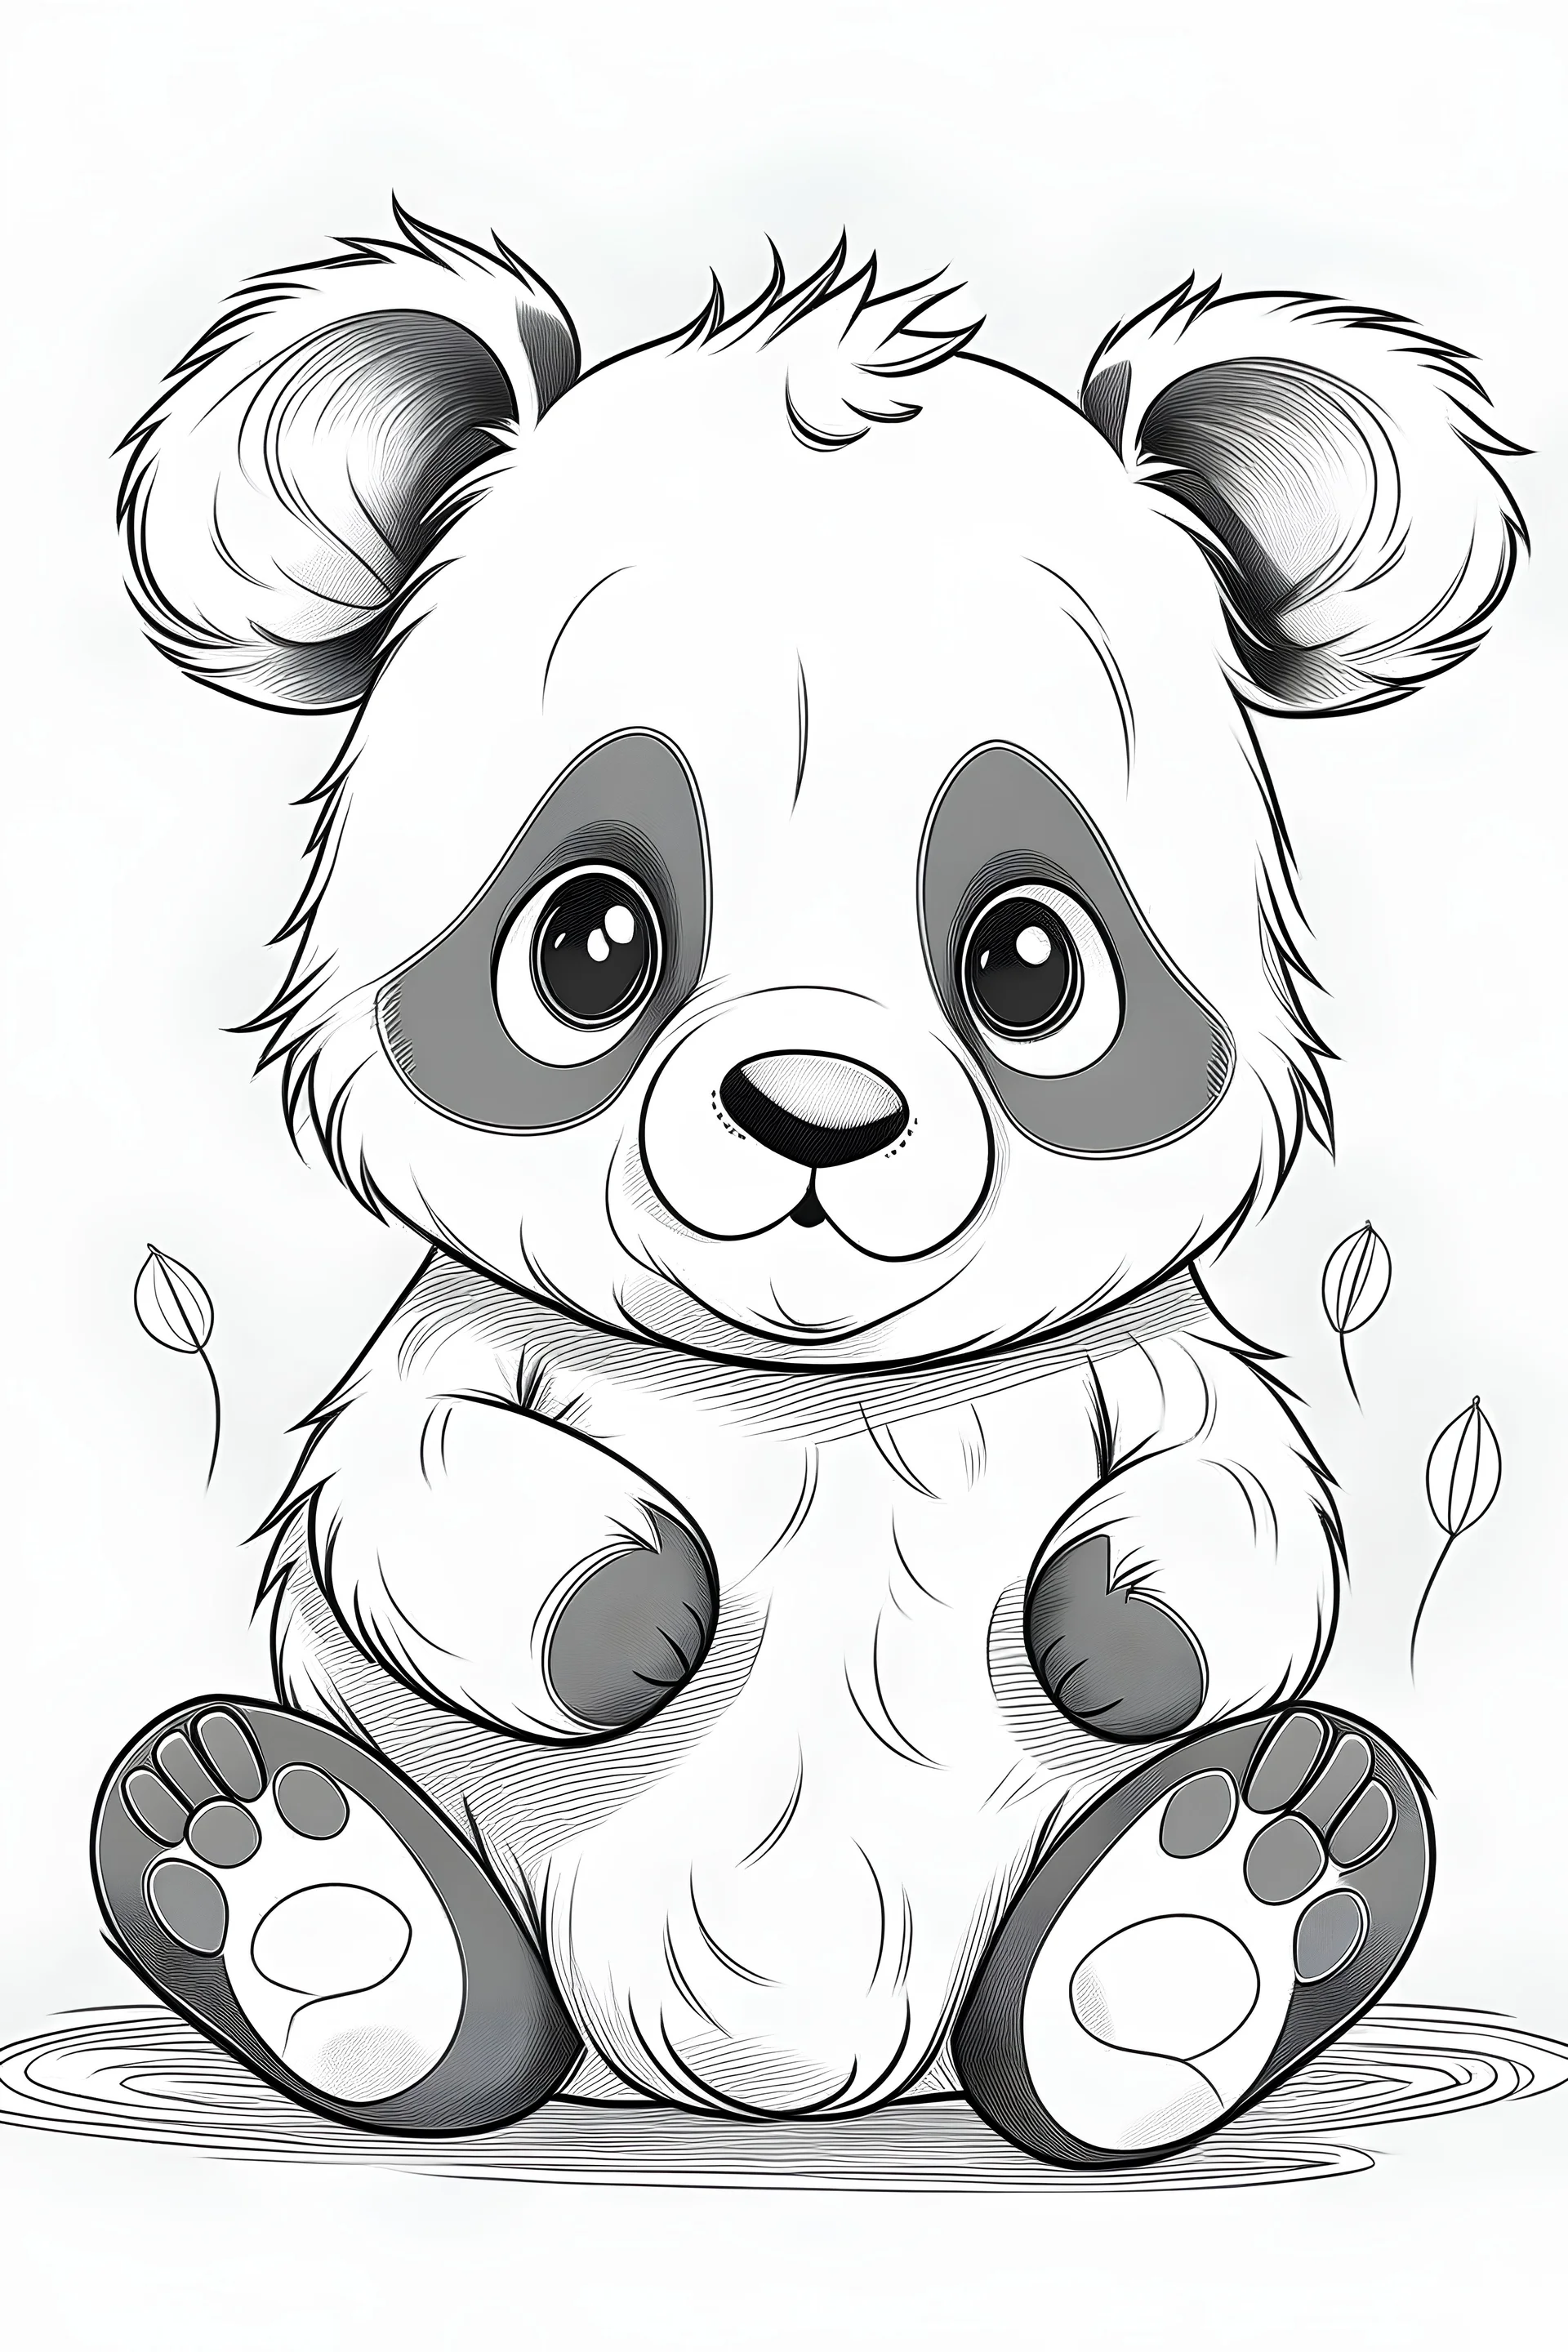 Buy How to Draw Cute Pandas for Kids - Volume 1 Book Online at Low Prices  in India | How to Draw Cute Pandas for Kids - Volume 1 Reviews & Ratings -  Amazon.in